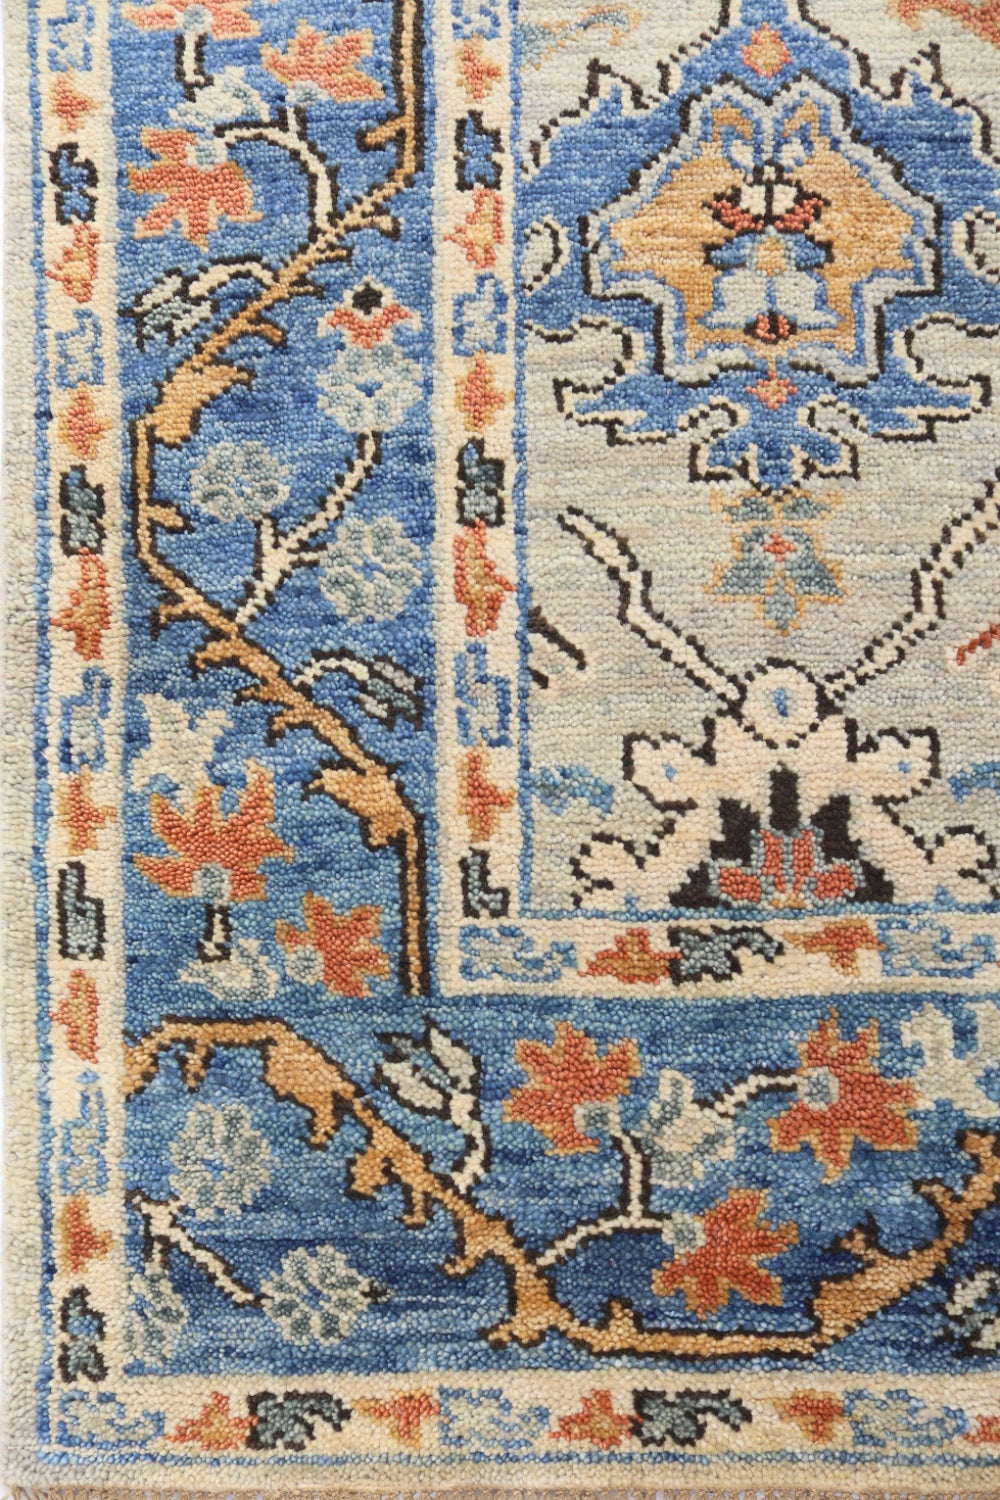 Sultanabad 2 Handwoven Traditional Rug, J71725